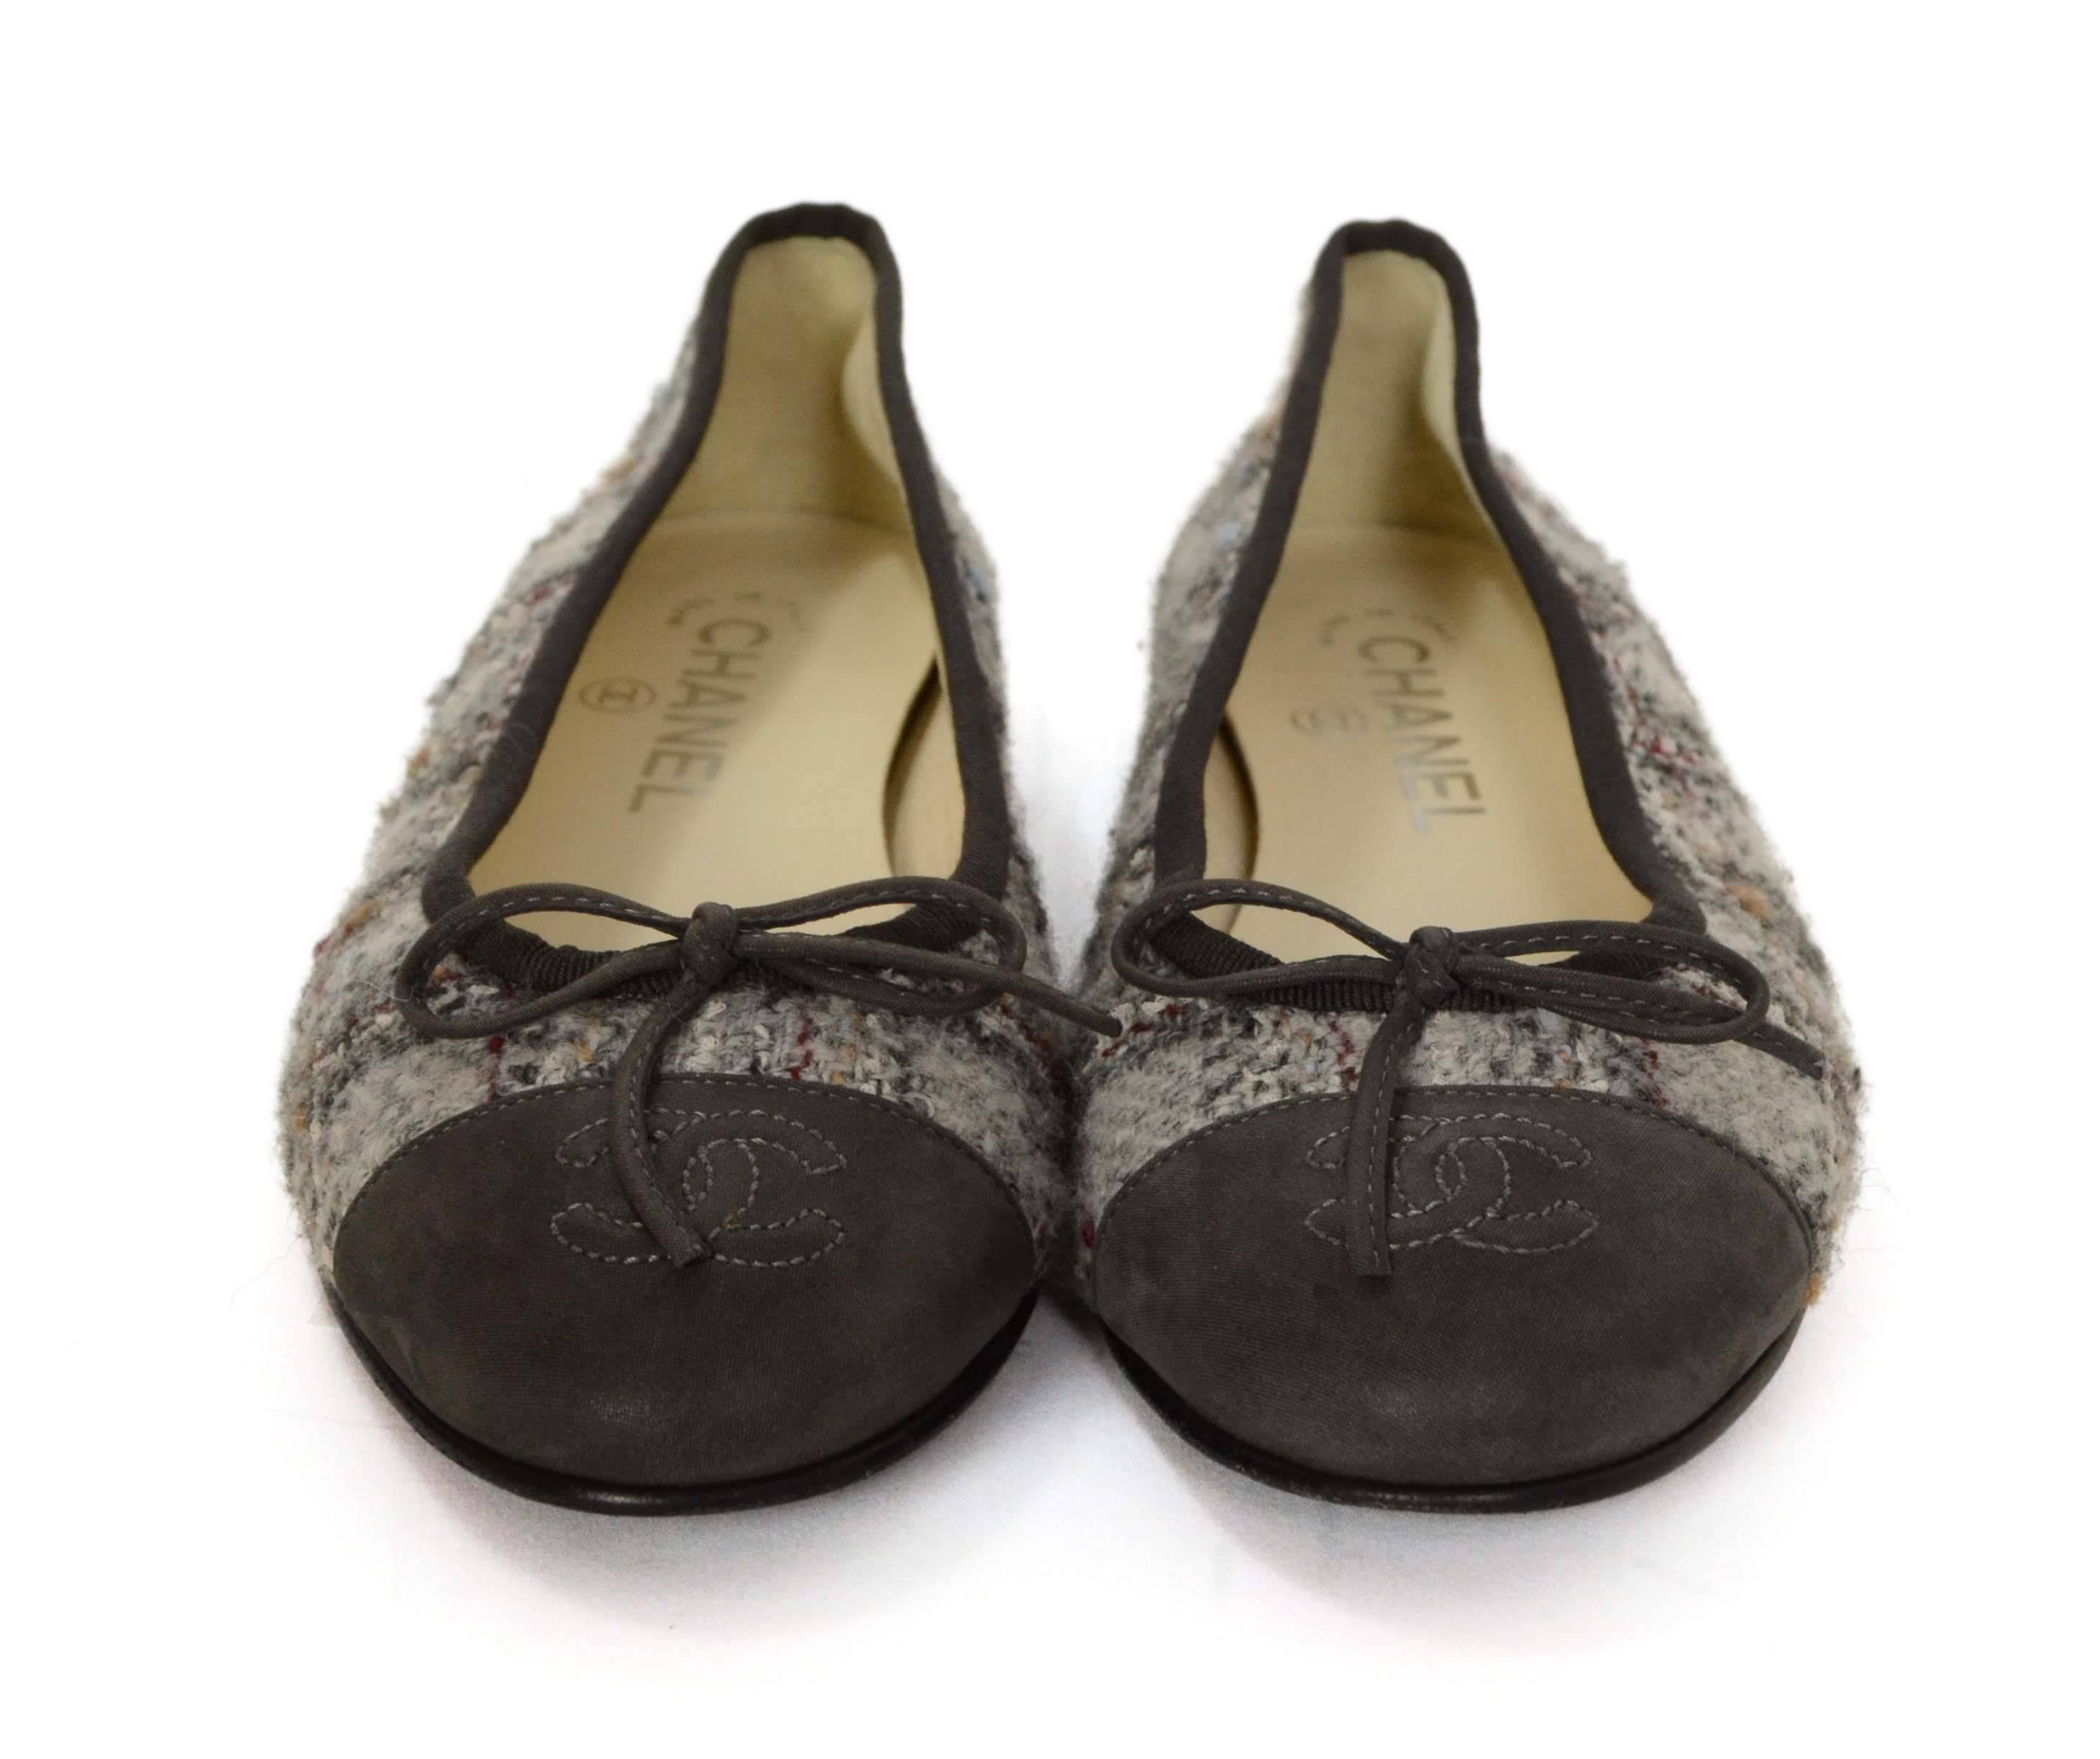 Features grey, red, blue and beige tweed with grey sueded toe cap with embossed CC

-Made In: Italy
-Year of Production: 2013
-Color: Grey with red, beige and blue accents
-Materials: Tweed, canvas and leather
-Closure/Opening: Slide on